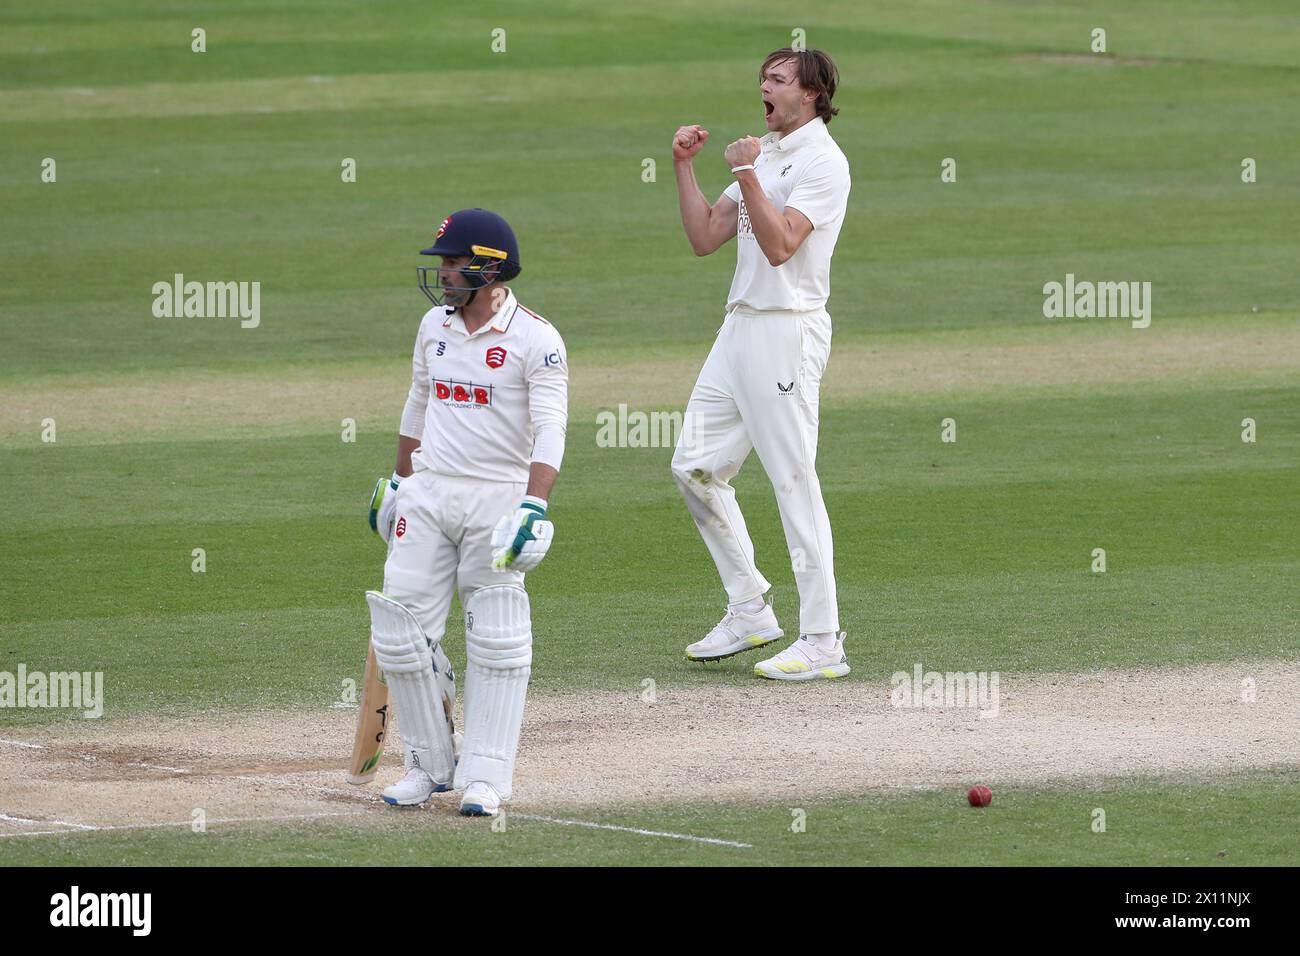 George Garrett of Kent celebrates taking the wicket of Dean Elgar during Essex CCC vs Kent CCC, Vitality County Championship Division 1 Cricket at The Stock Photo